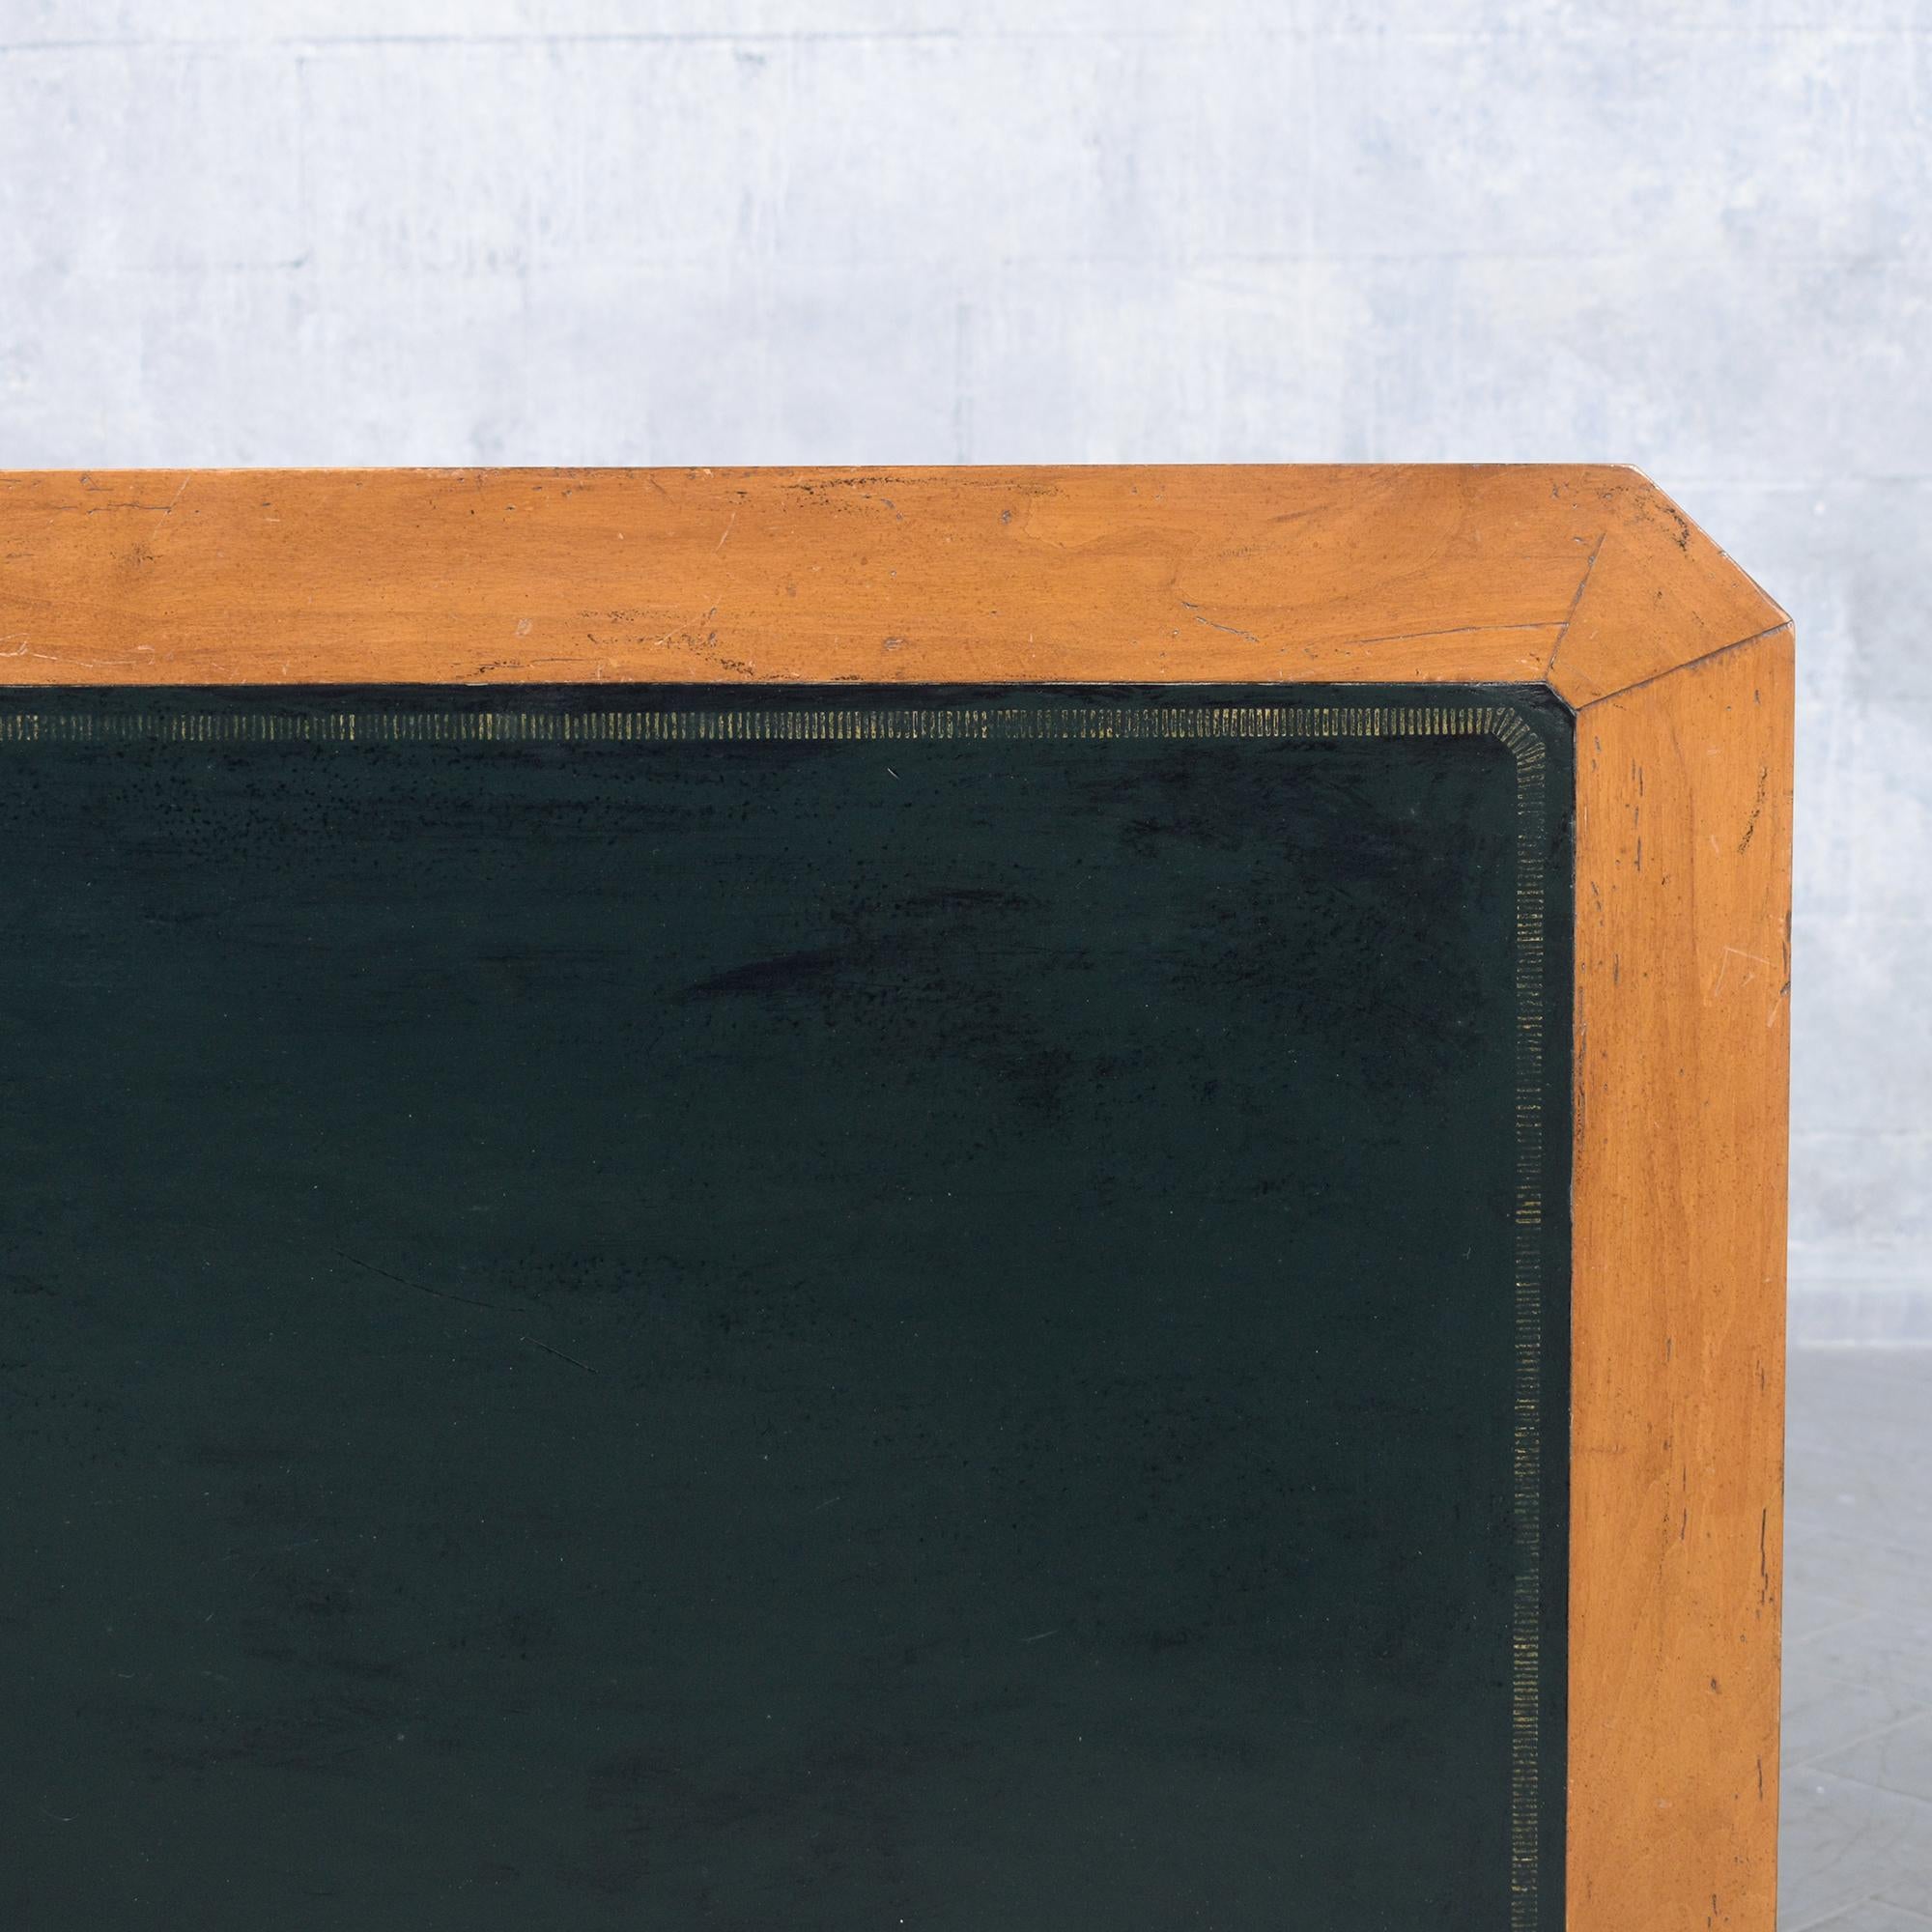 Restored 1970 Empire Desk: Light Walnut & Ebonized Finish with Green Leather Top For Sale 10